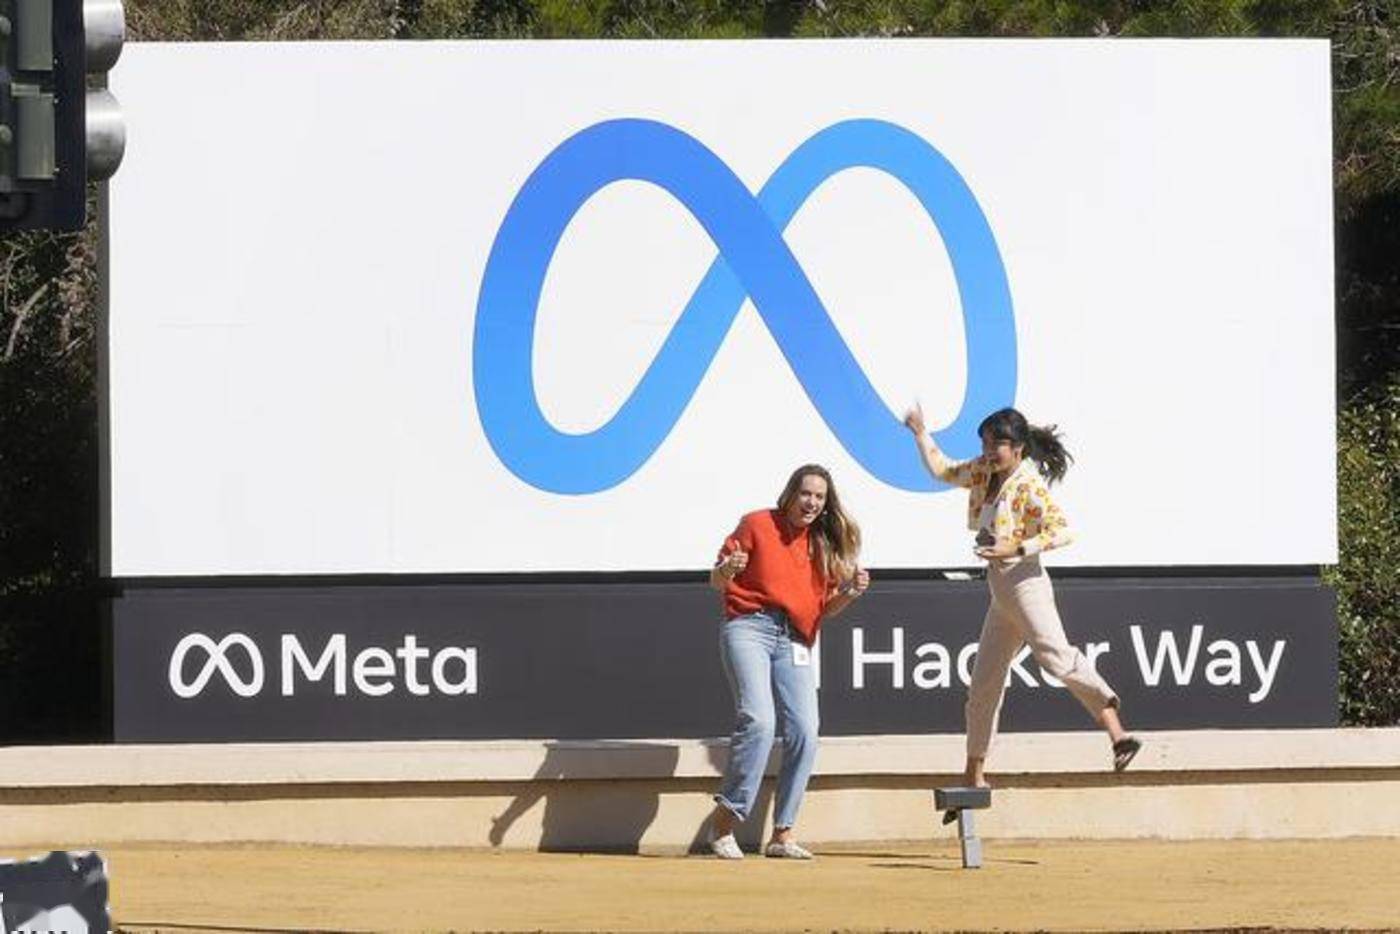  Meta Loses Over US$200 Billion in Valuation After Posting D